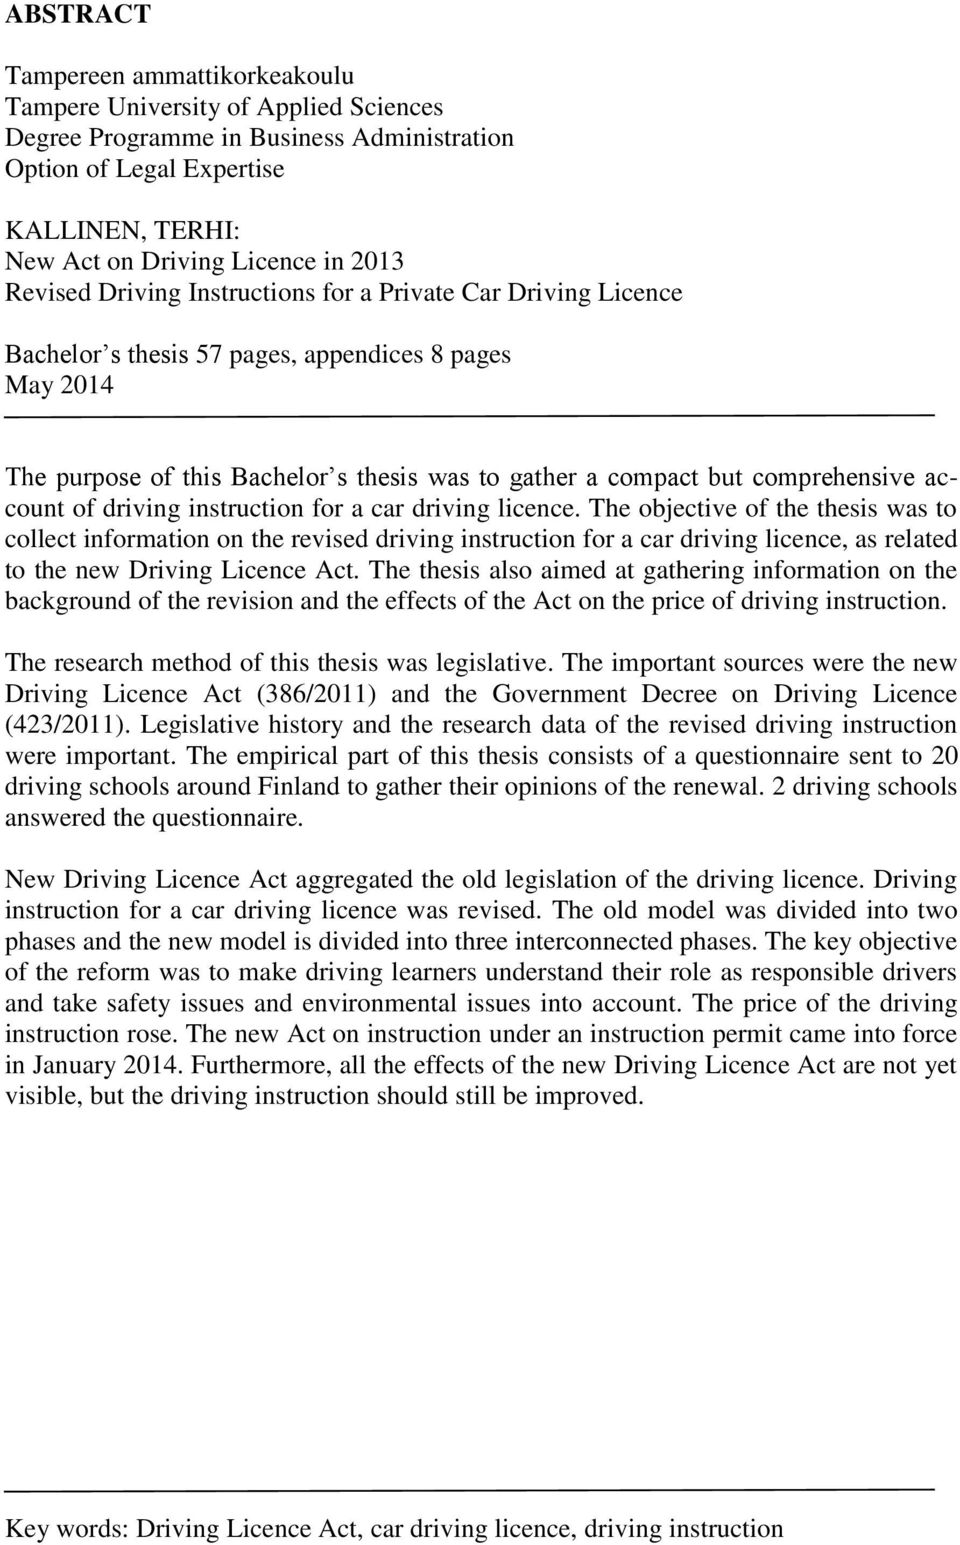 account of driving instruction for a car driving licence.